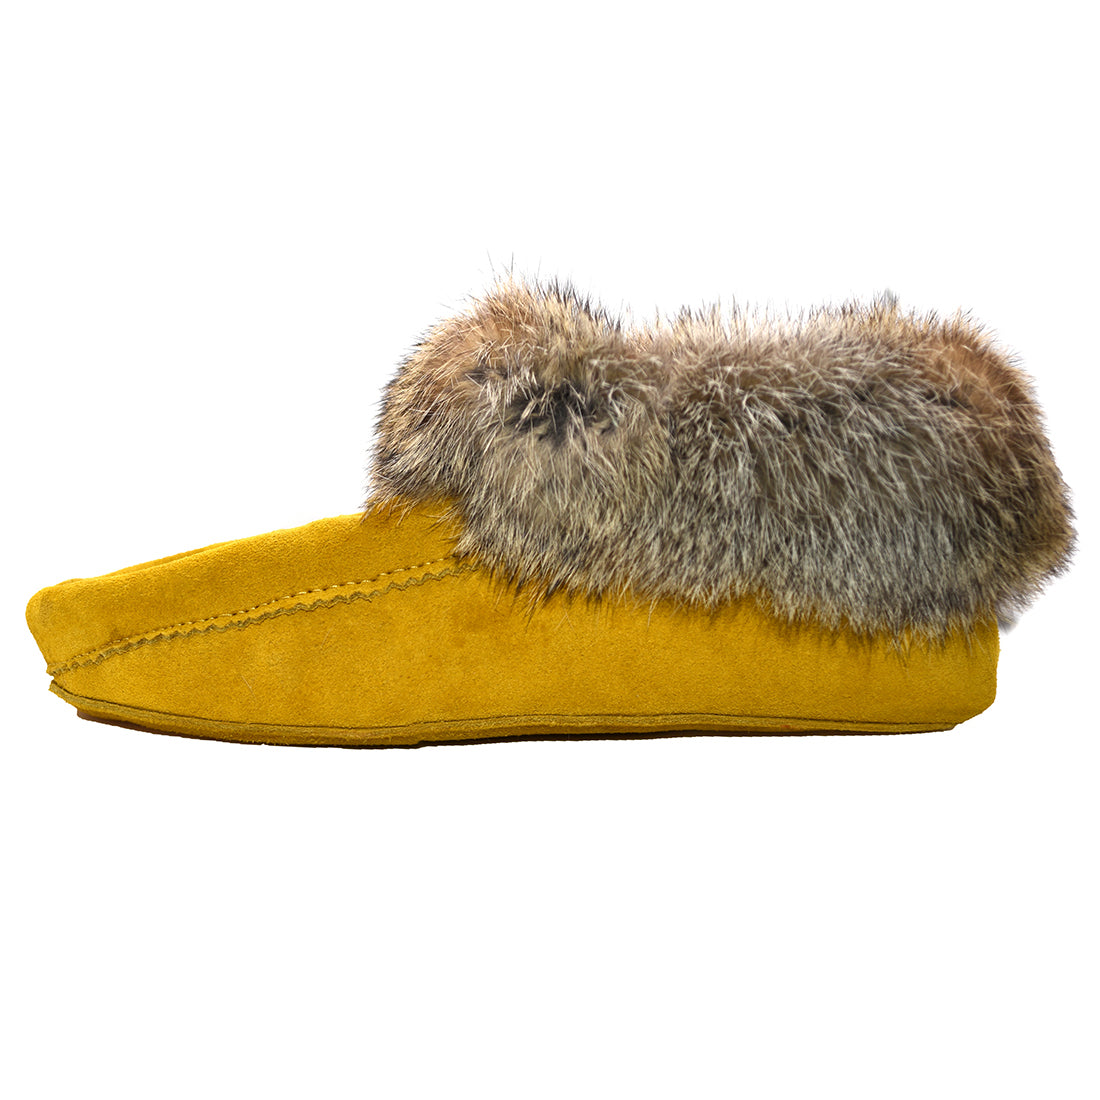 Millffy Native dechic slippers unisex Canadian-Made Moccasins leather slippers